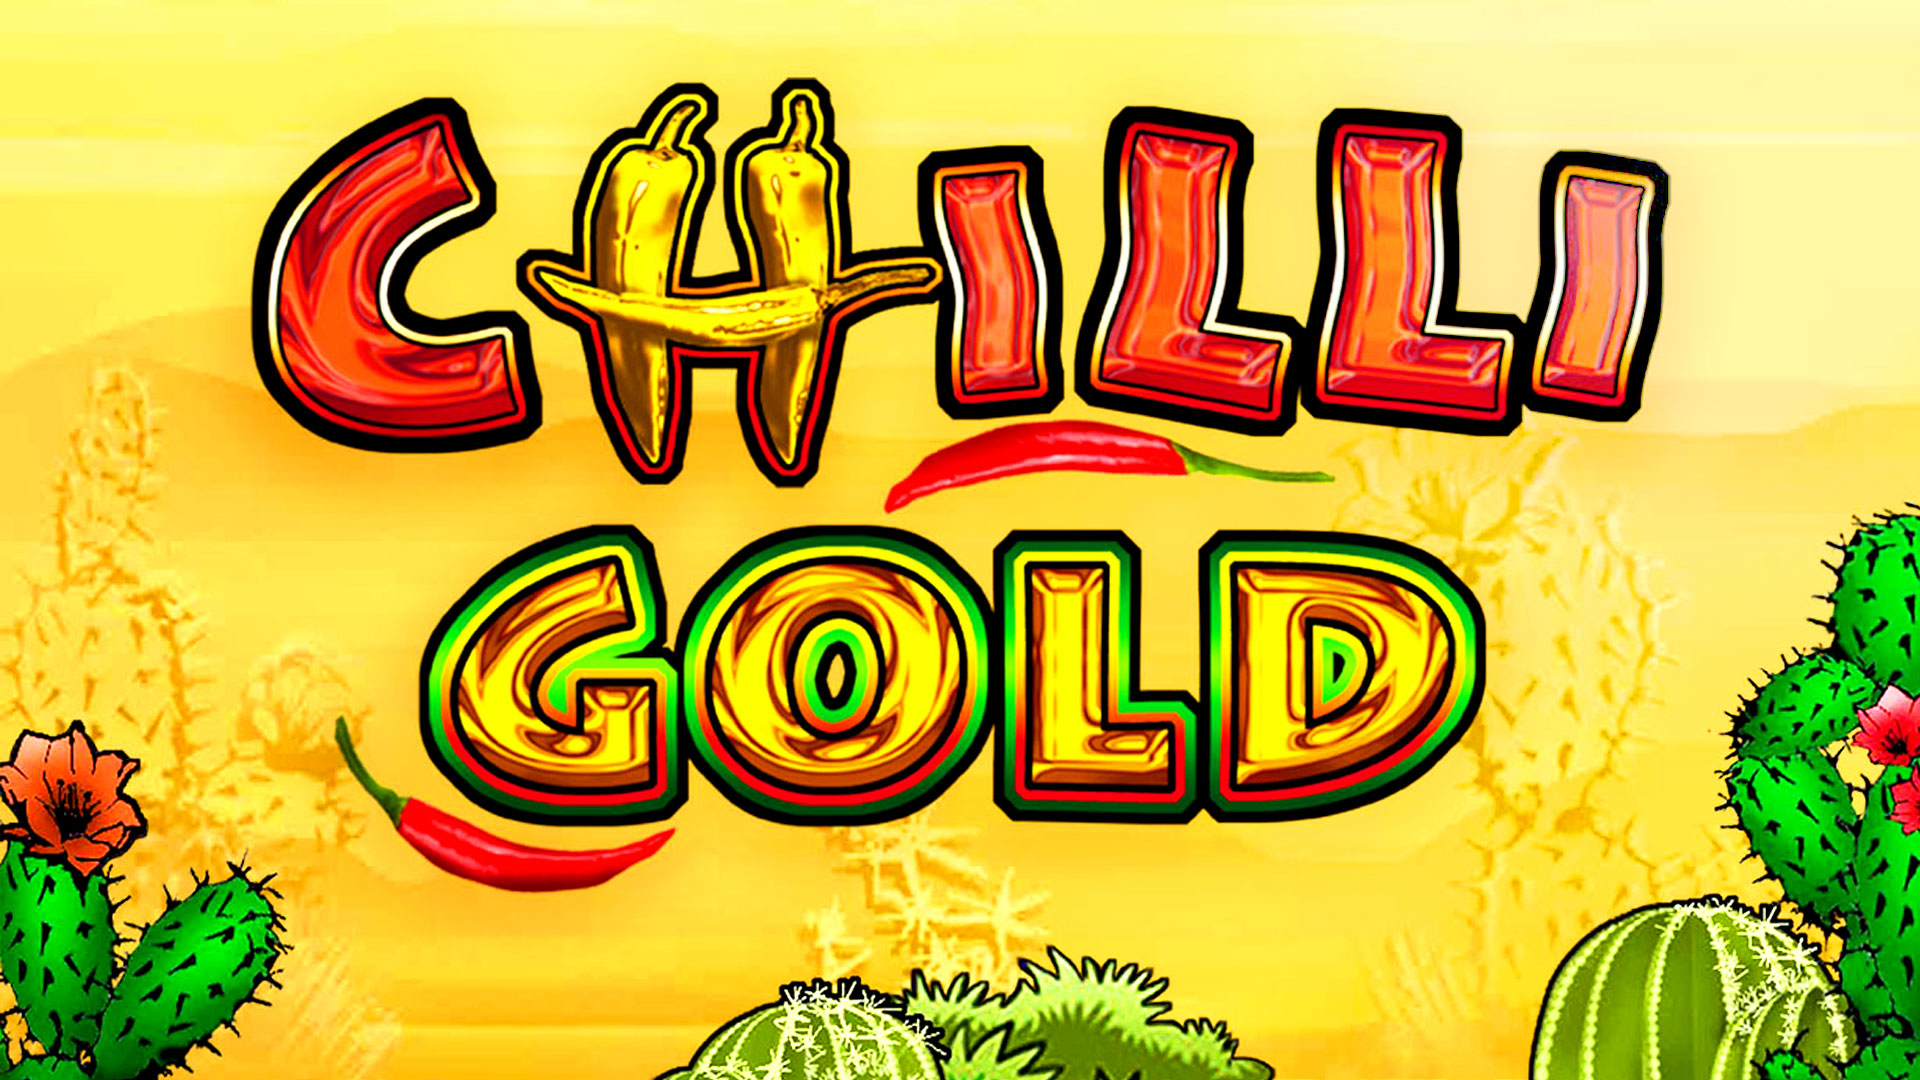 Game hight resolution background Chilli Gold